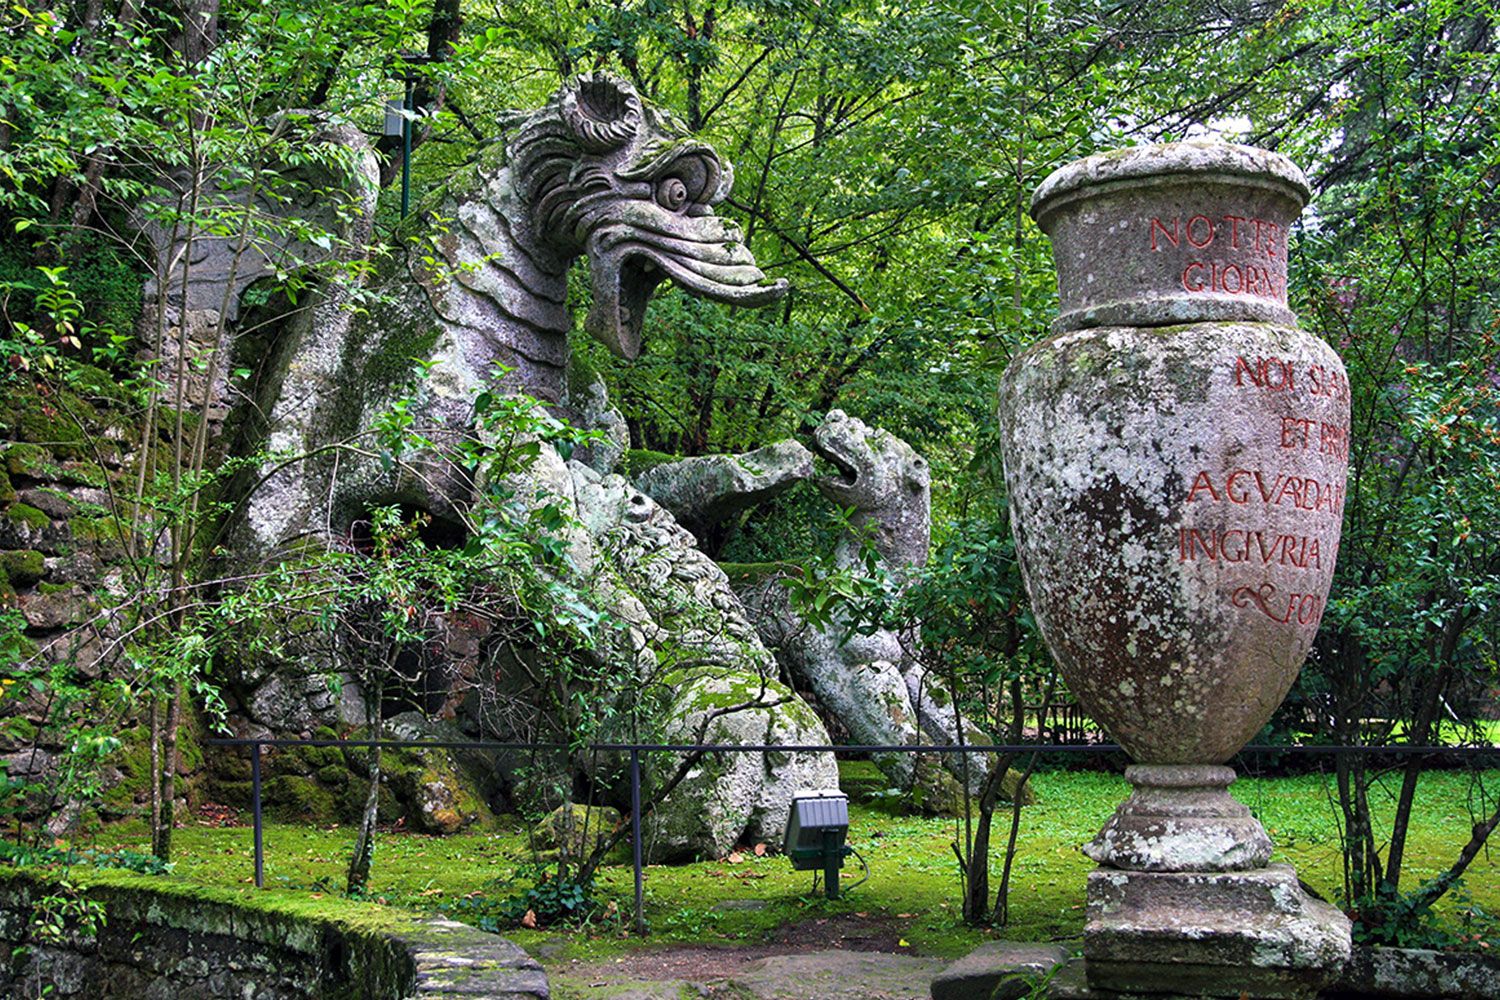 Dragons live in Bomarzo